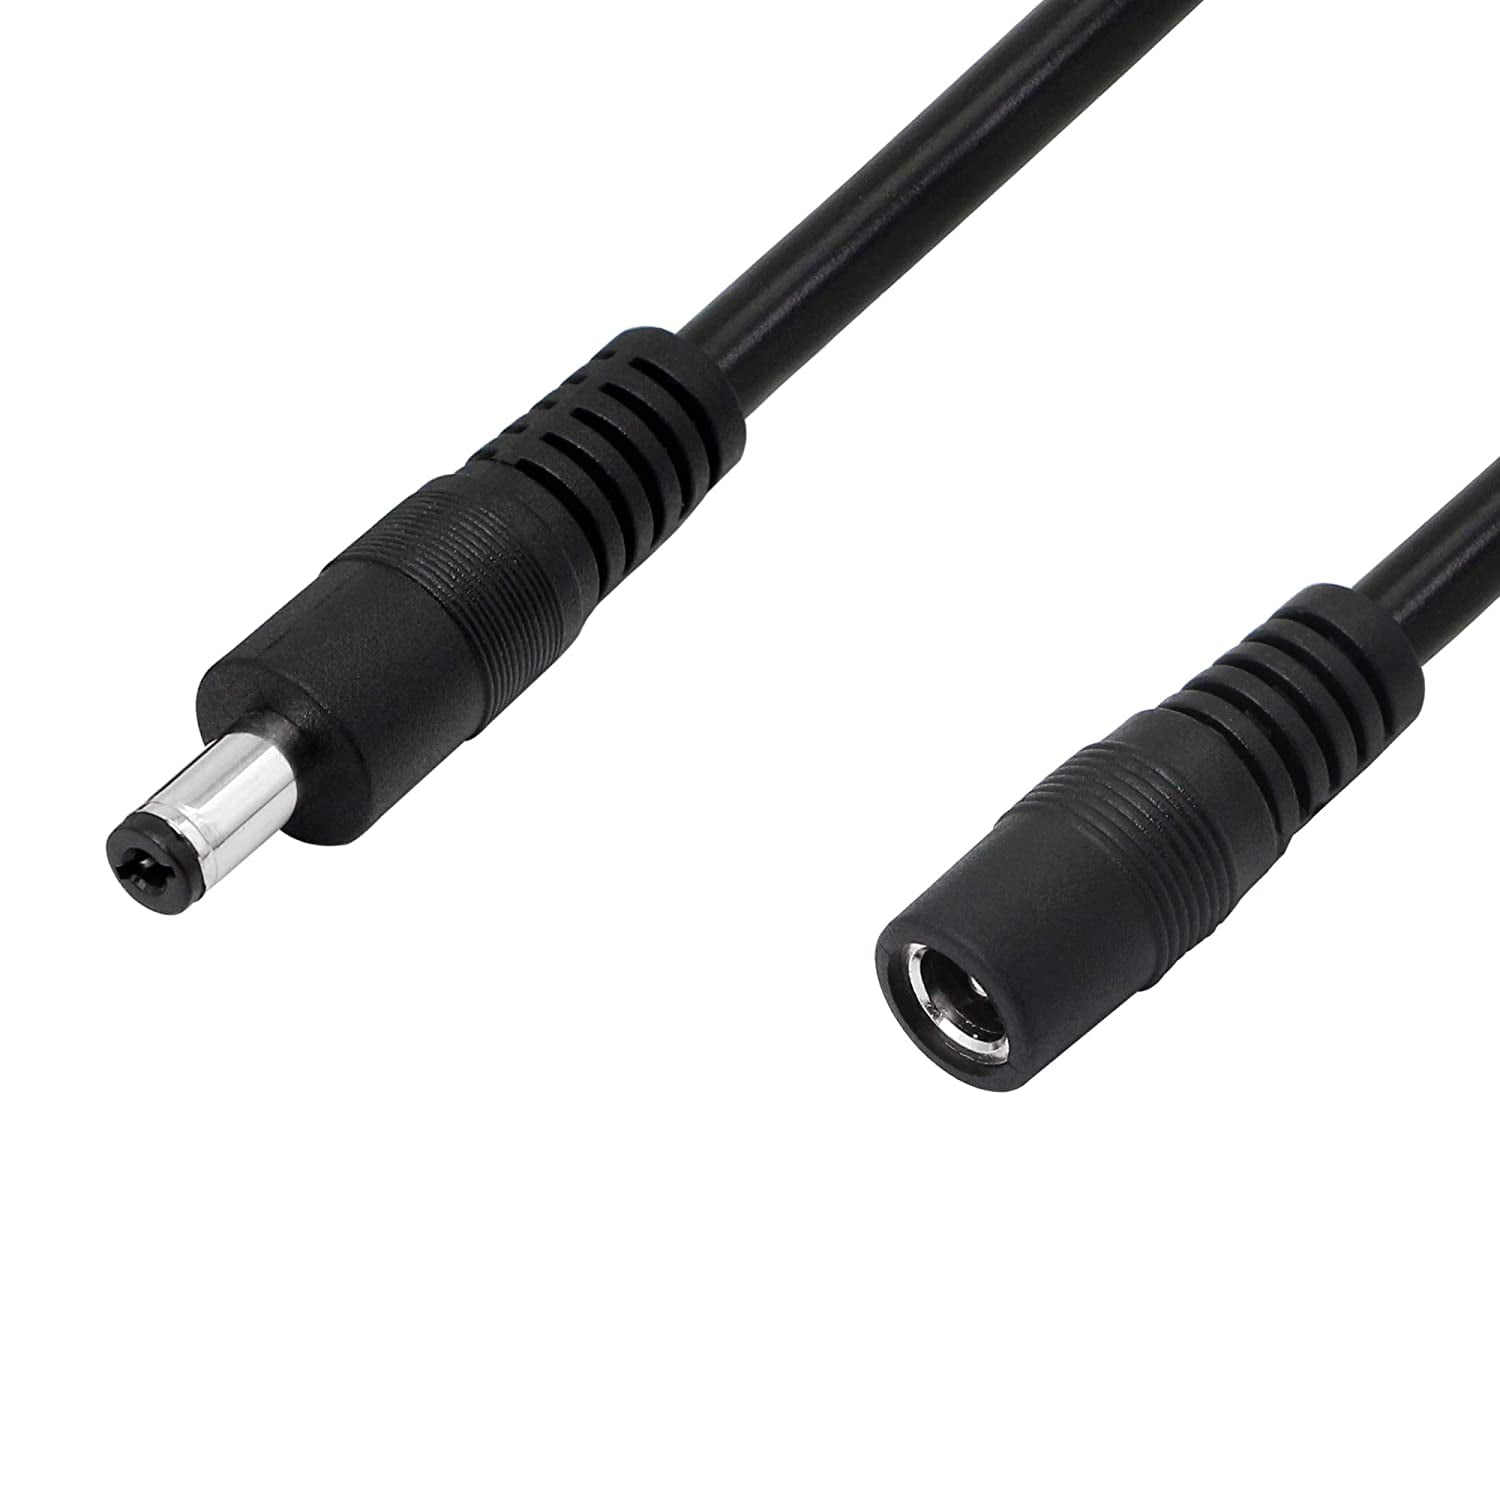 DC Power Extension Cable，DC 5.5mm x 2.1mm Male to Female Power Adapter Cable，3FT 18AWG Heavy Duty Cord for 12V CCTV Wireless IP Camera,LED,Car,More.-2PCS